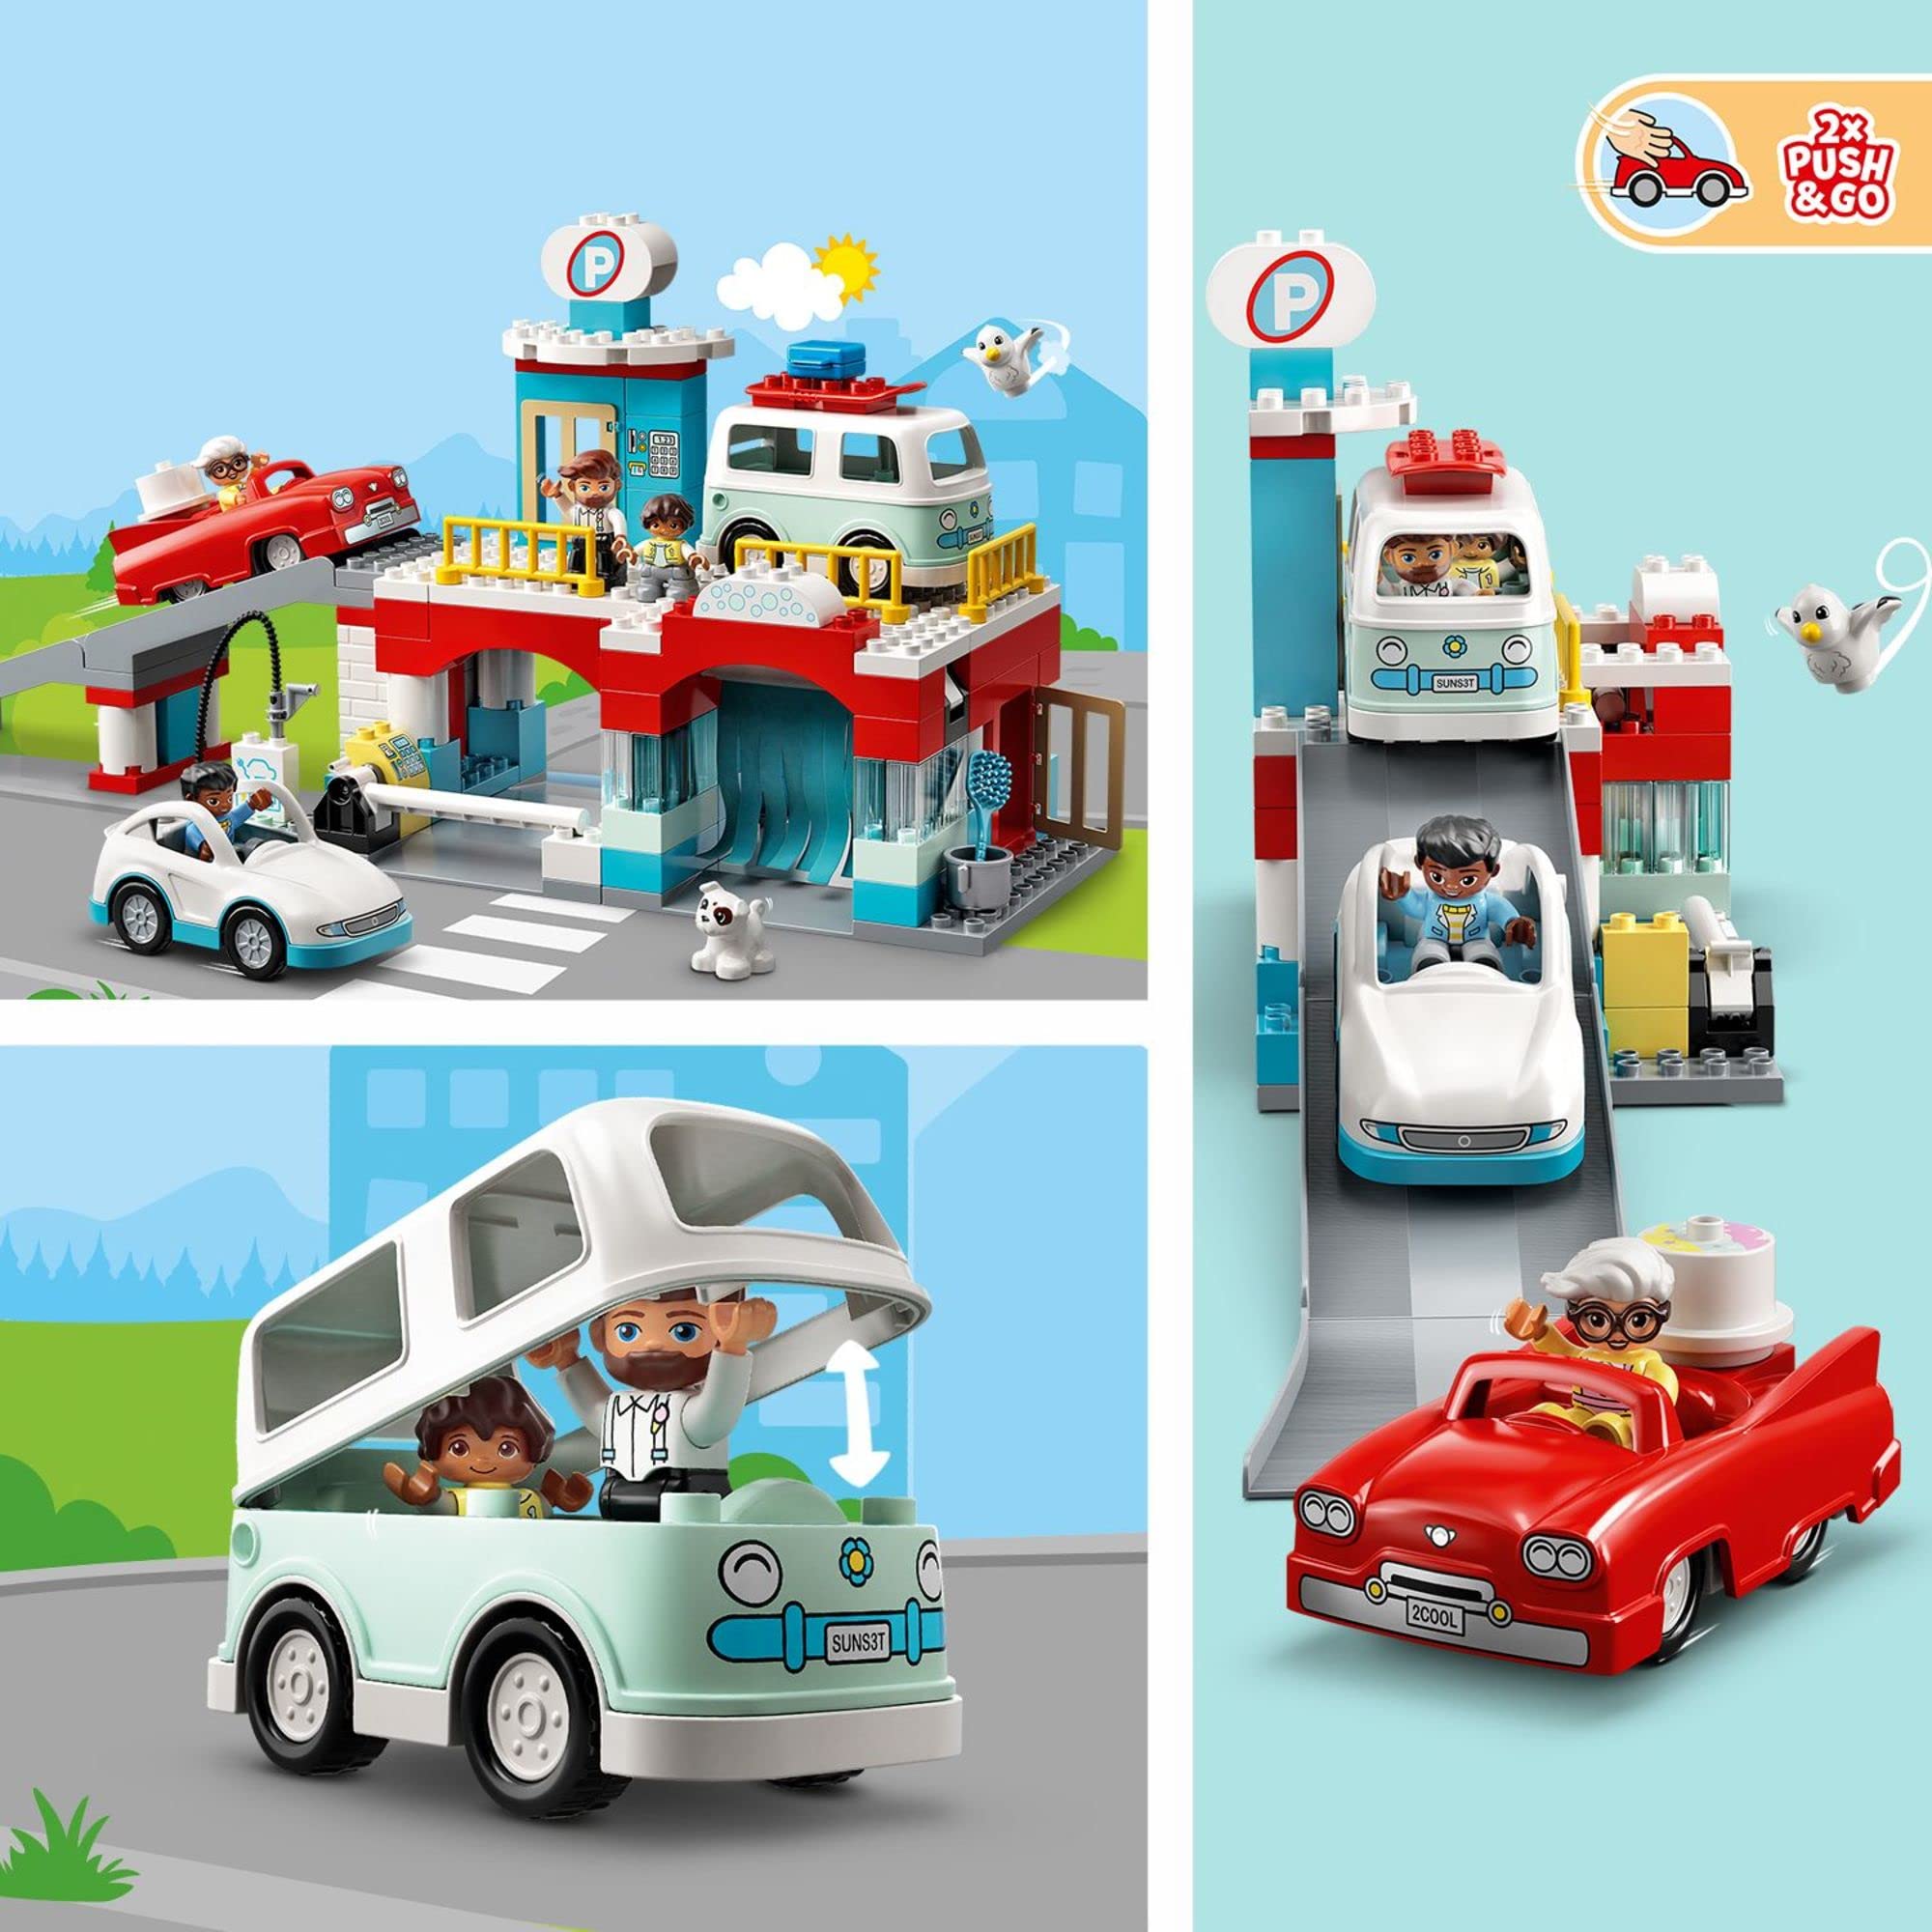 LEGO DUPLO Parking Garage and Car Wash Set 10948, Learning Toy for Toddlers with Garage, Gas Station & Toy Cars, Gifts for 2 Plus Year Old Boys & Girls